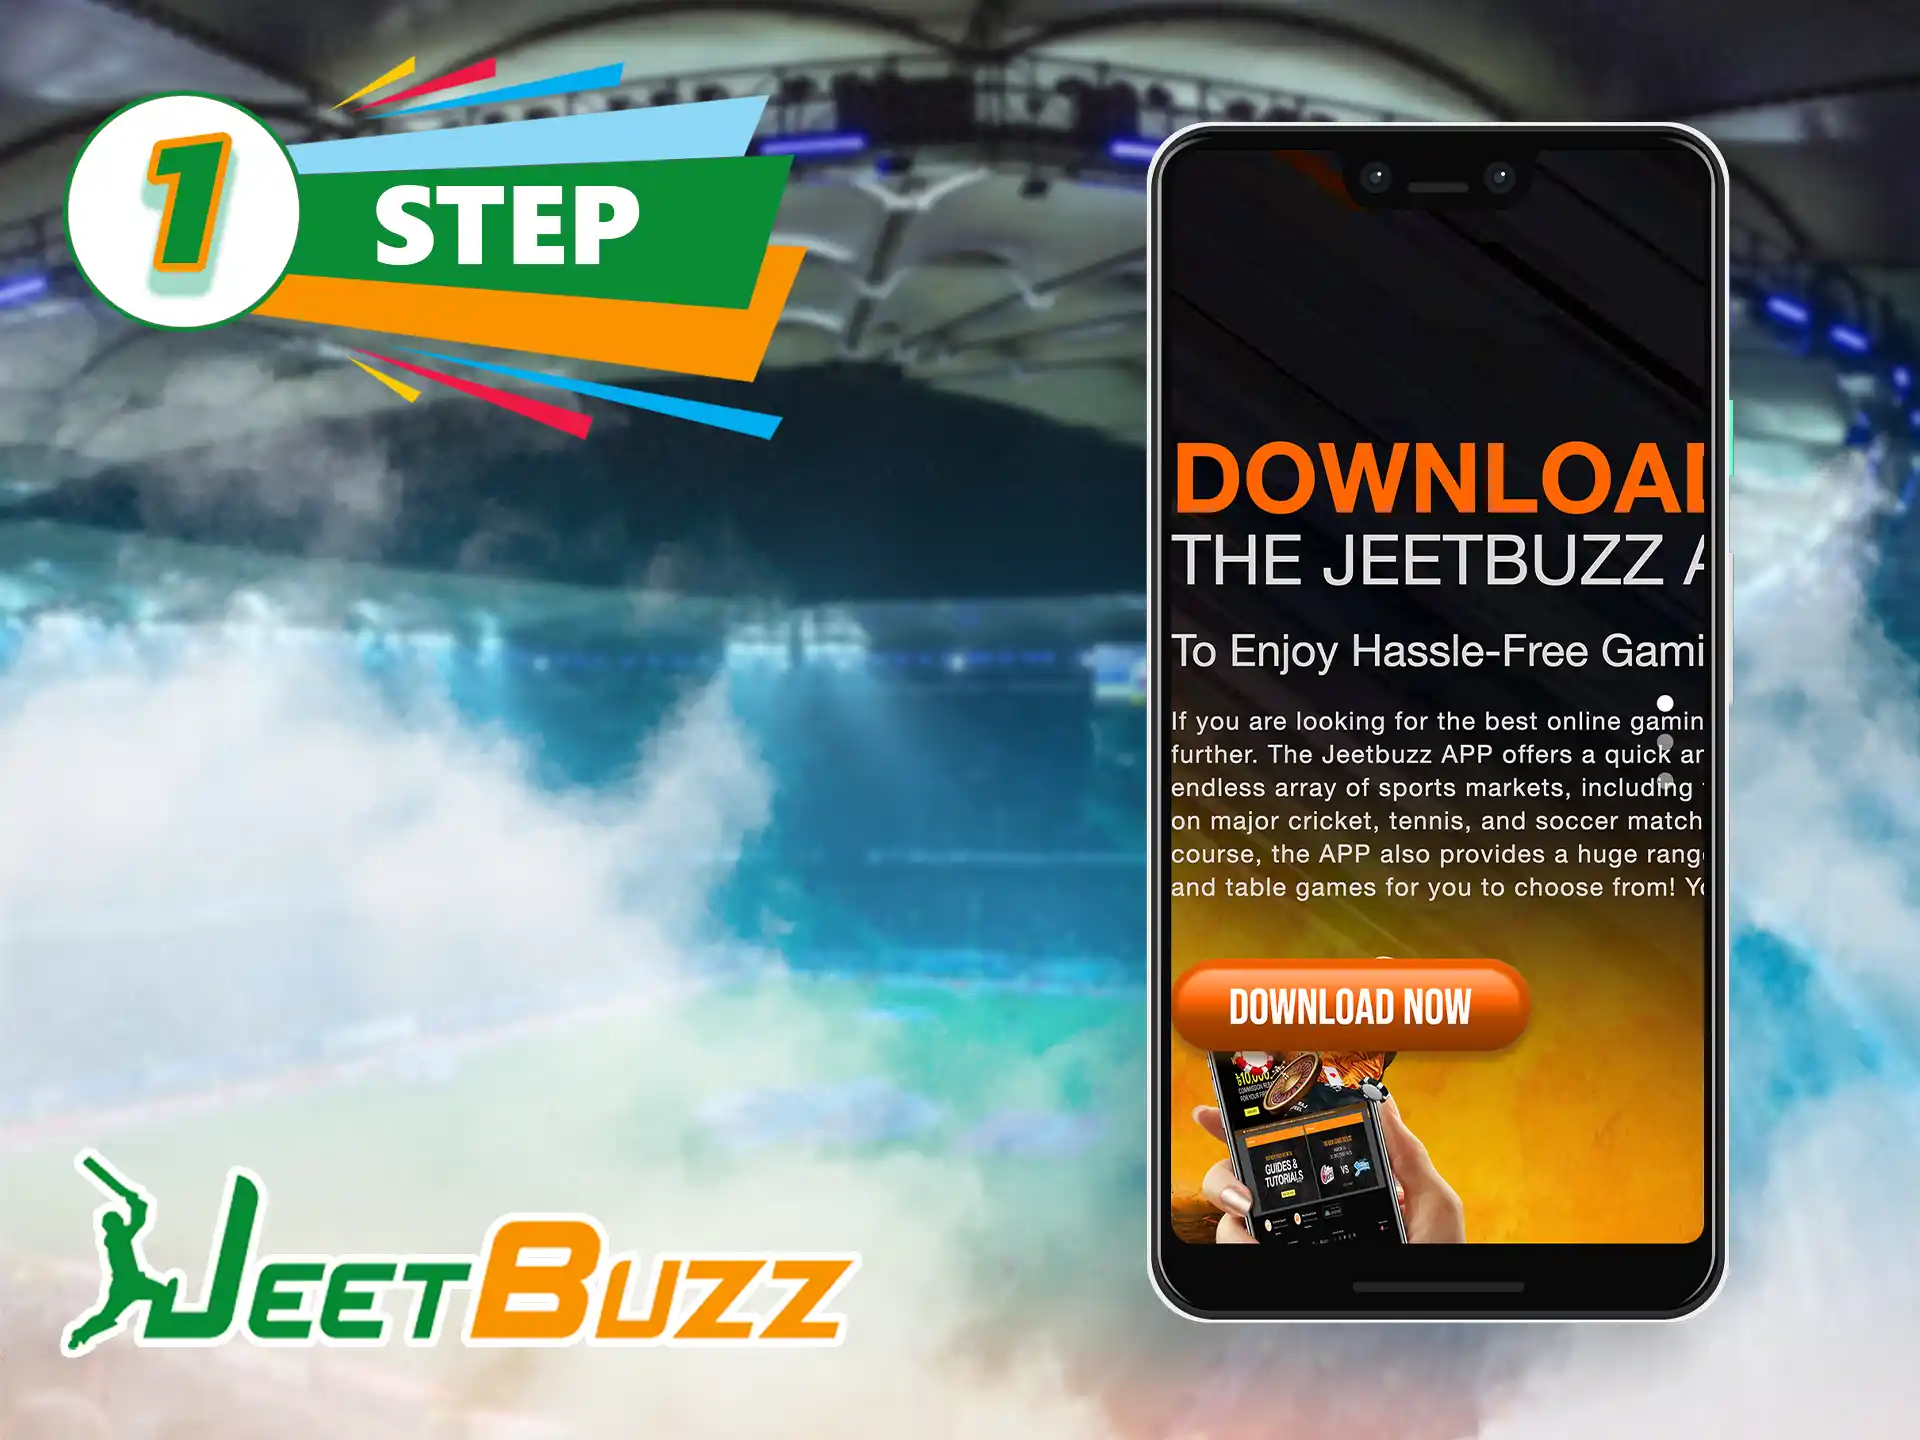 Start your journey into the world of betting by getting an installation file of the JeetBuzz app.